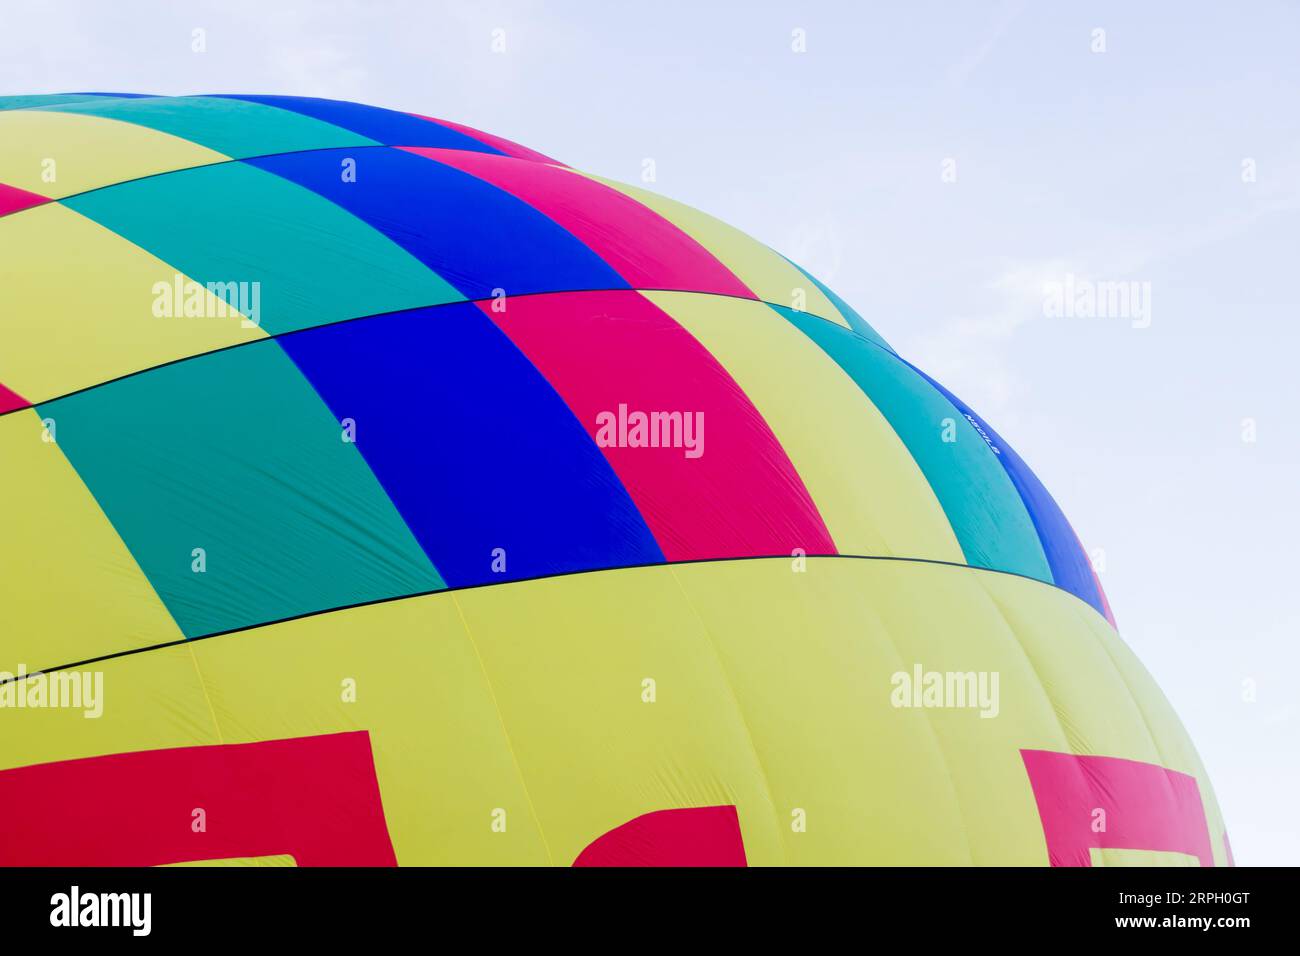 A hot air balloon is being inflated and it is only partially filled. The balloon is make up of squares of color that include blue, greened and yellow. Stock Photo